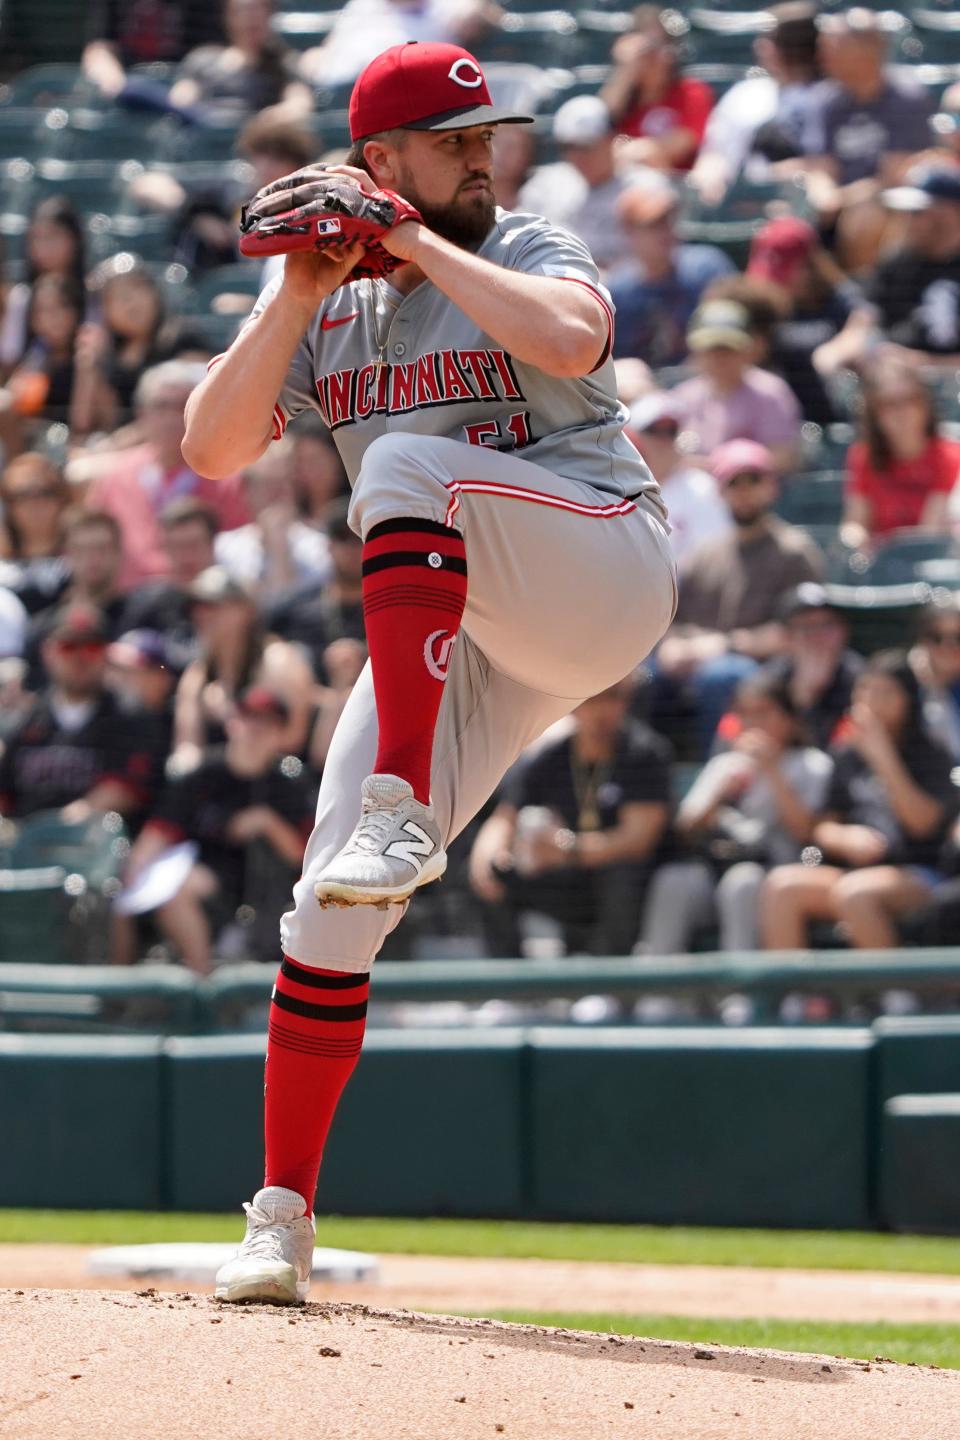 Graham Ashcraft pitched two outs deep into the sixth inning Sunday as the Reds finished off a sweep of the White Sox.